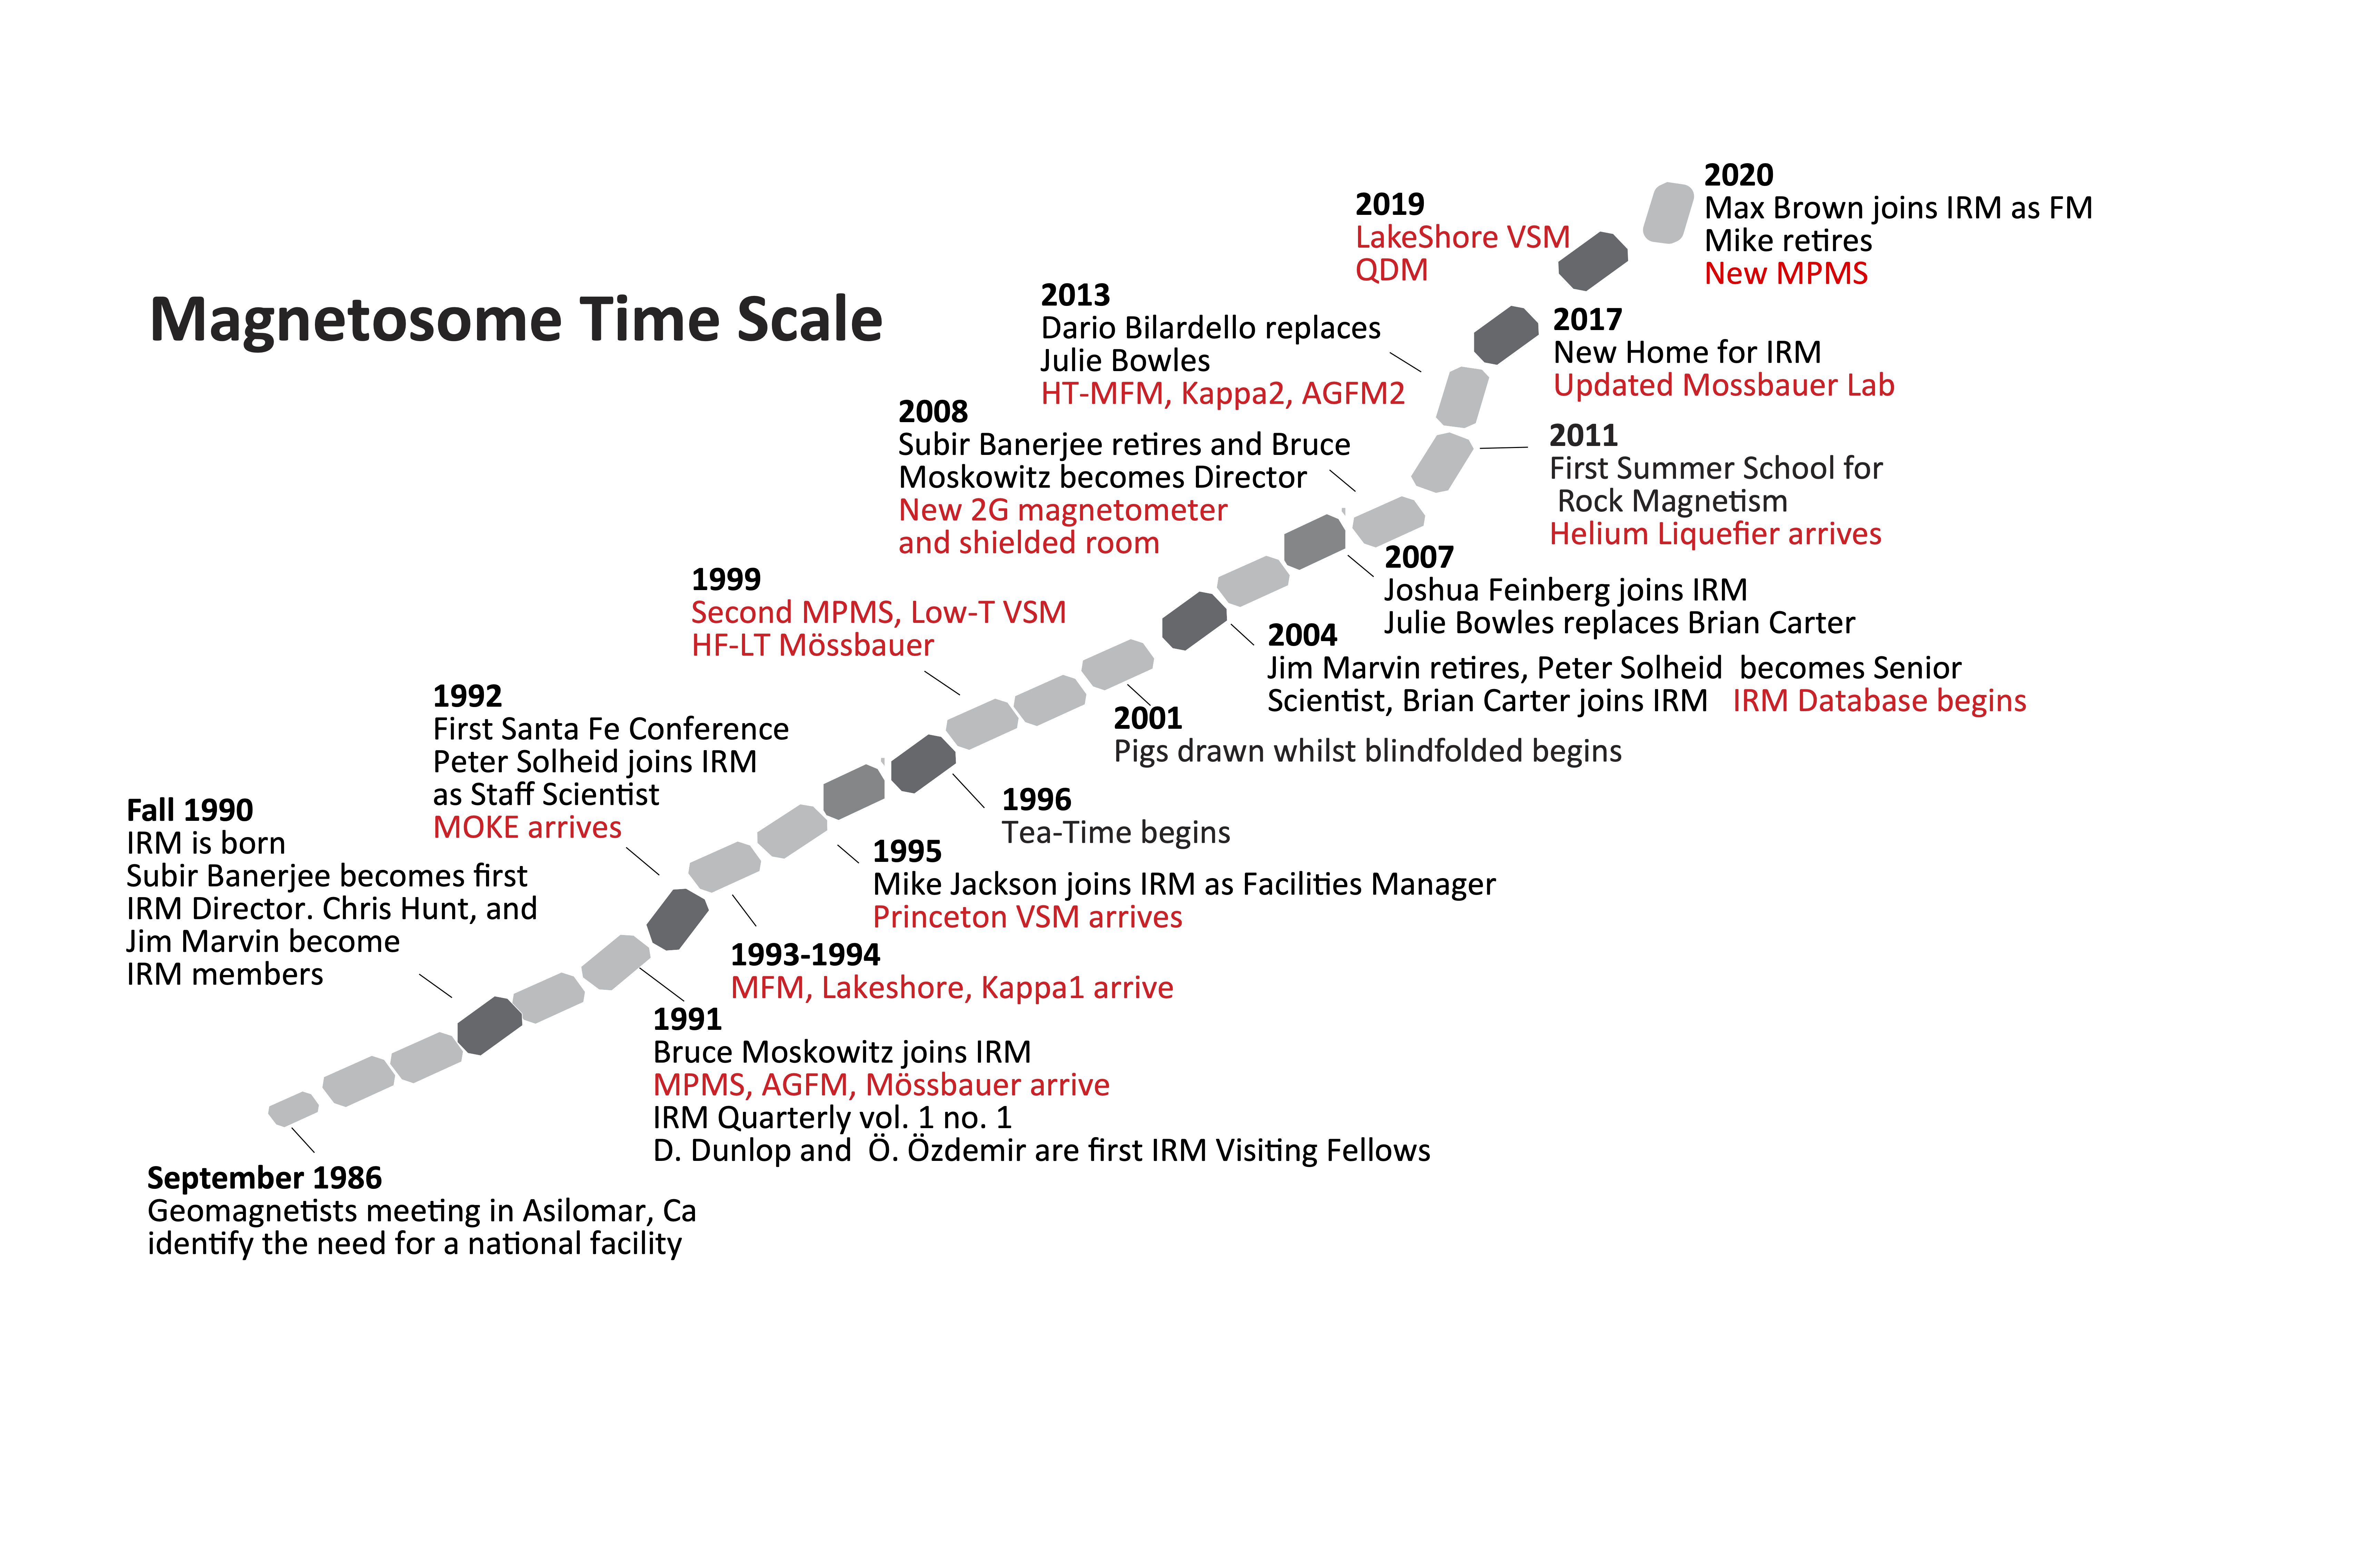 Magnetosome Timeline of the IRM